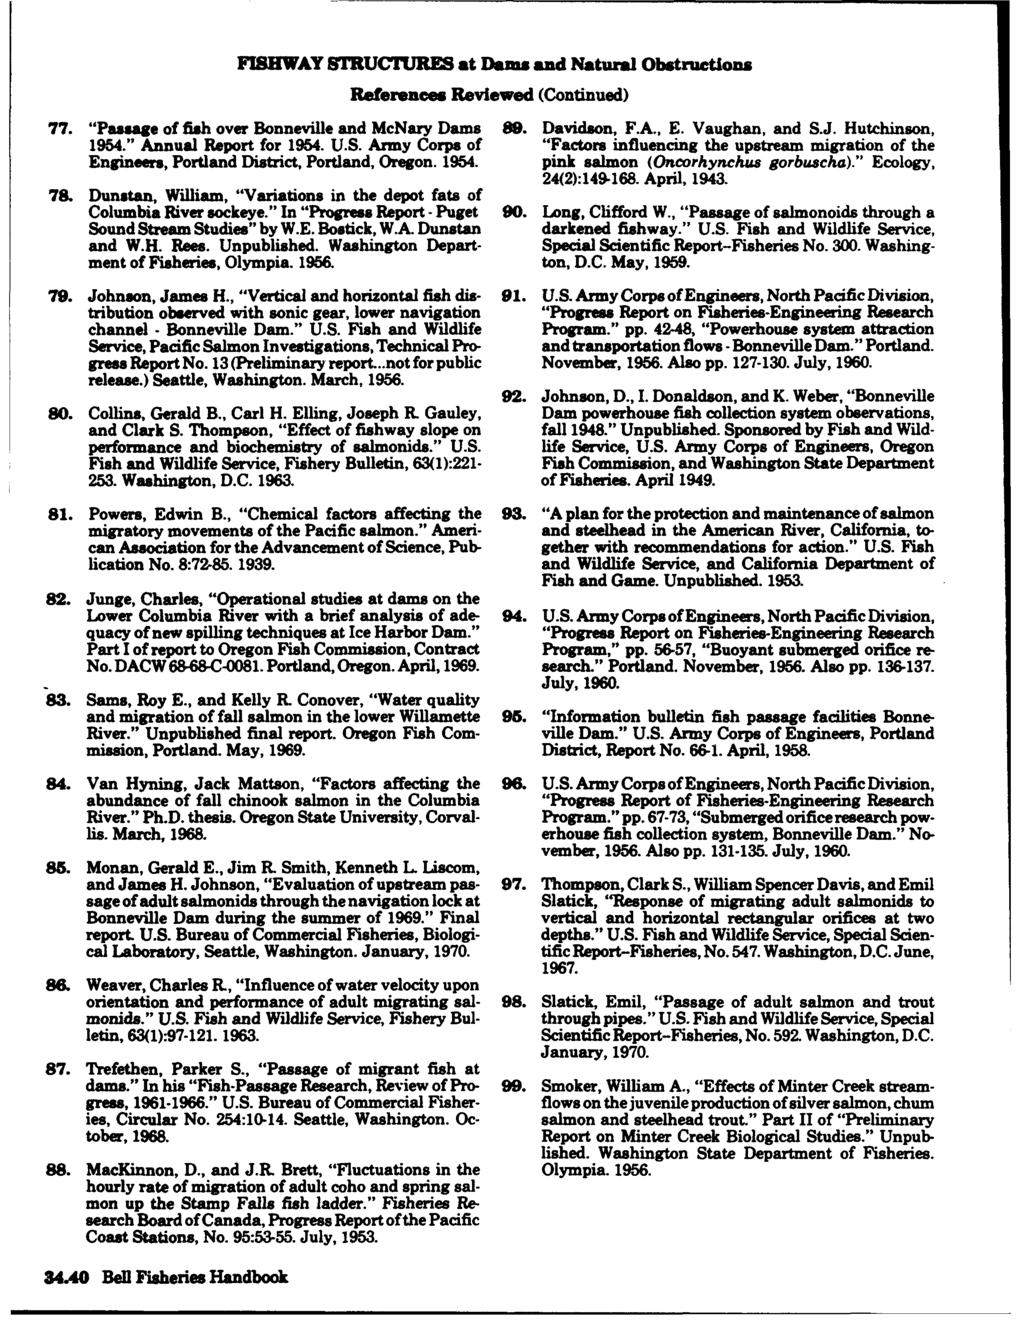 HWAY STRUCTURES at Dams and Natural Obstructions References Reviewed (Continued) 77. "Passage of fish over Bonneville and McNary Dams 89. Davidson, F.A., E. Vaughan, and S.J. Hutchinson, 1954.